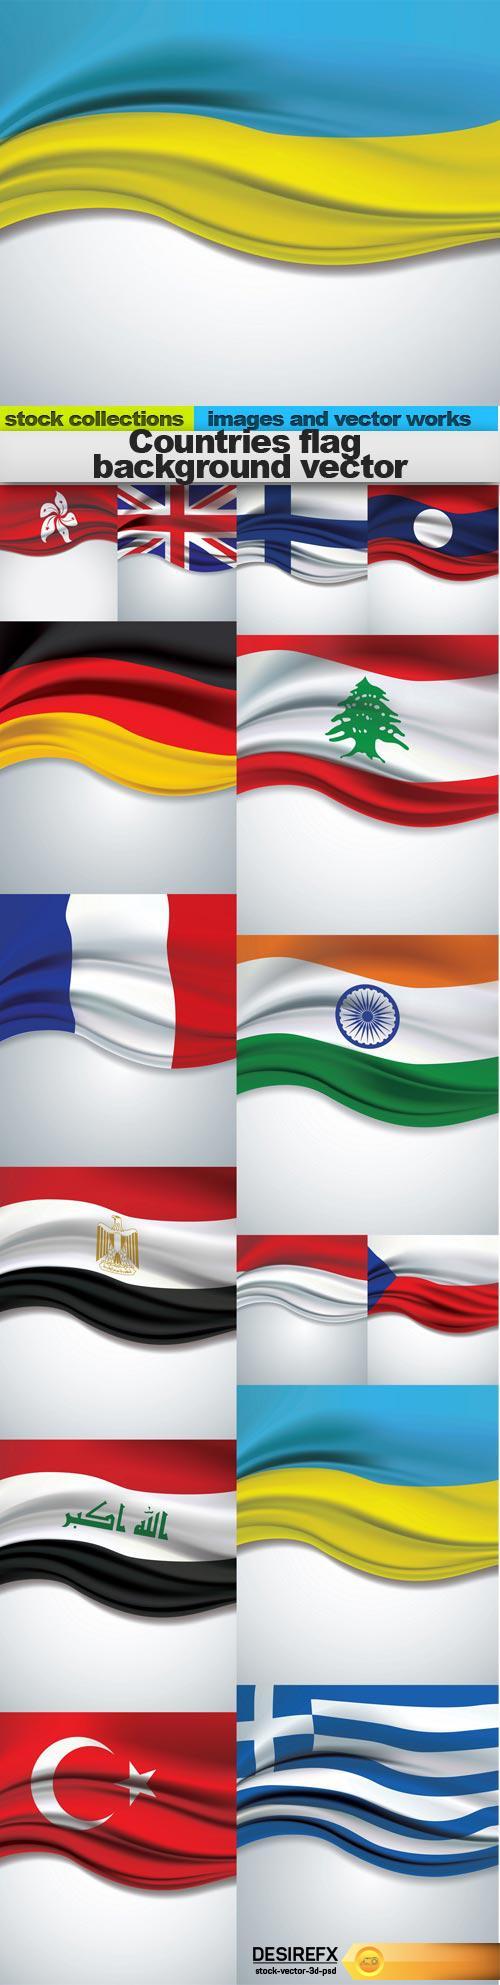 Countries flag background vector, 15 x EPS